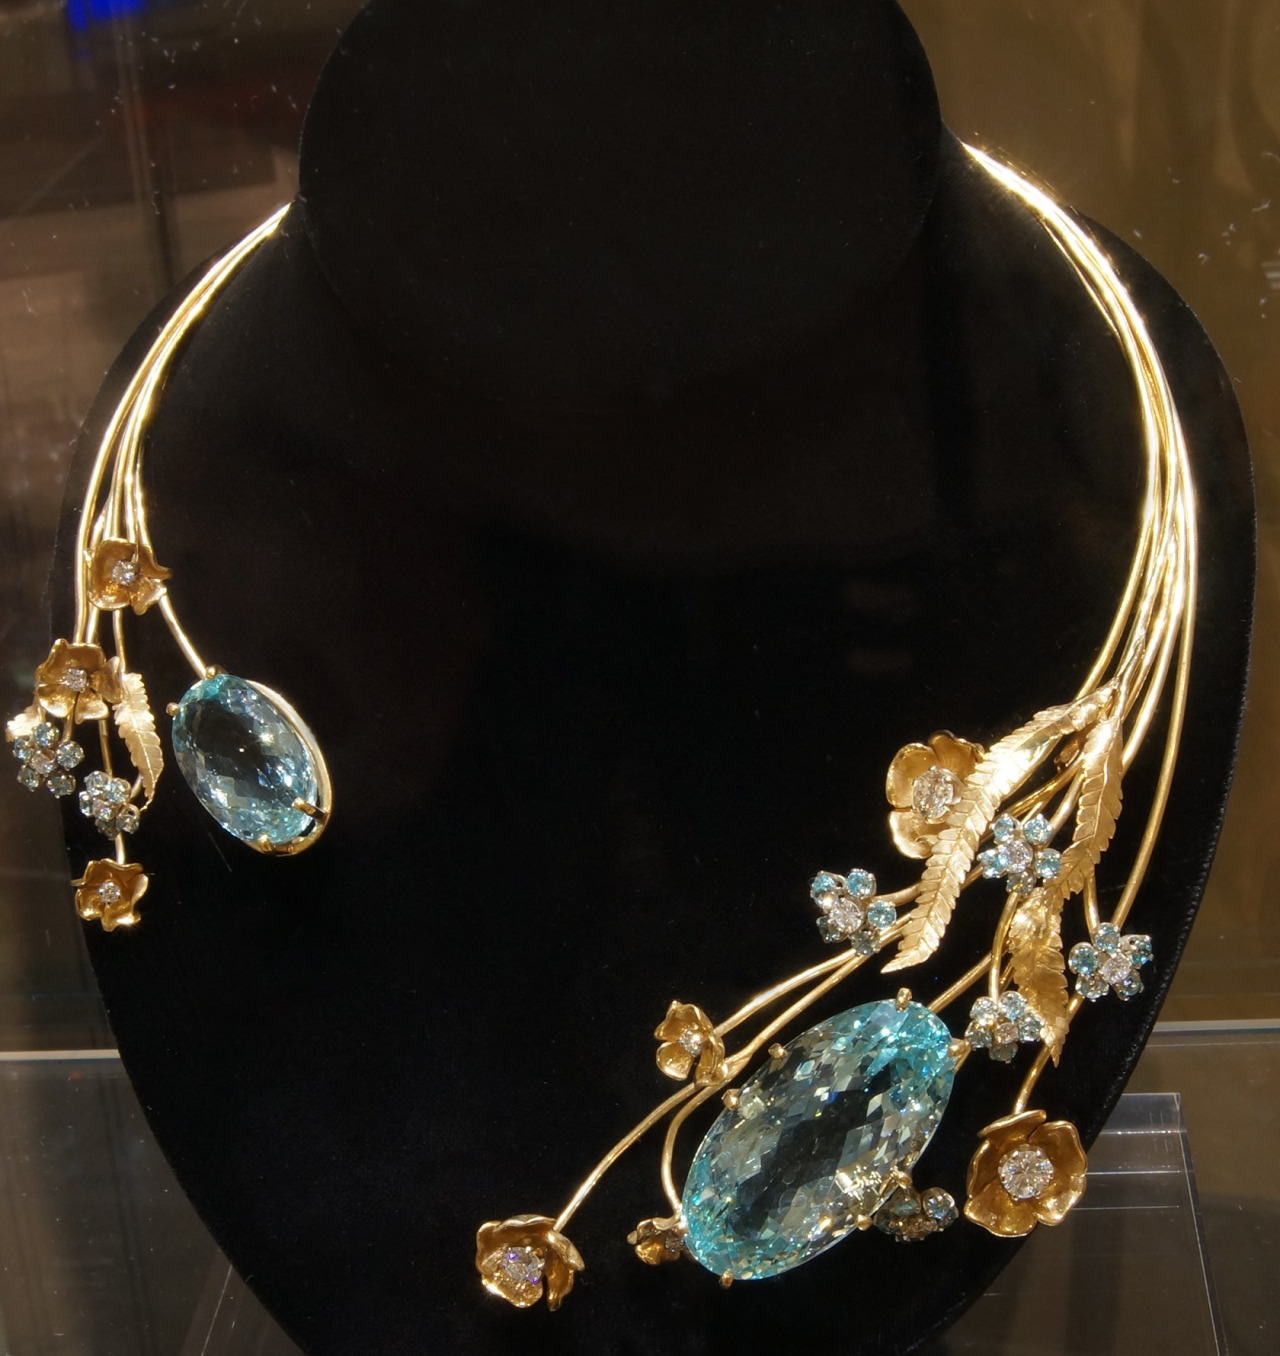 The Garden Necklace, gold jewlery with gems